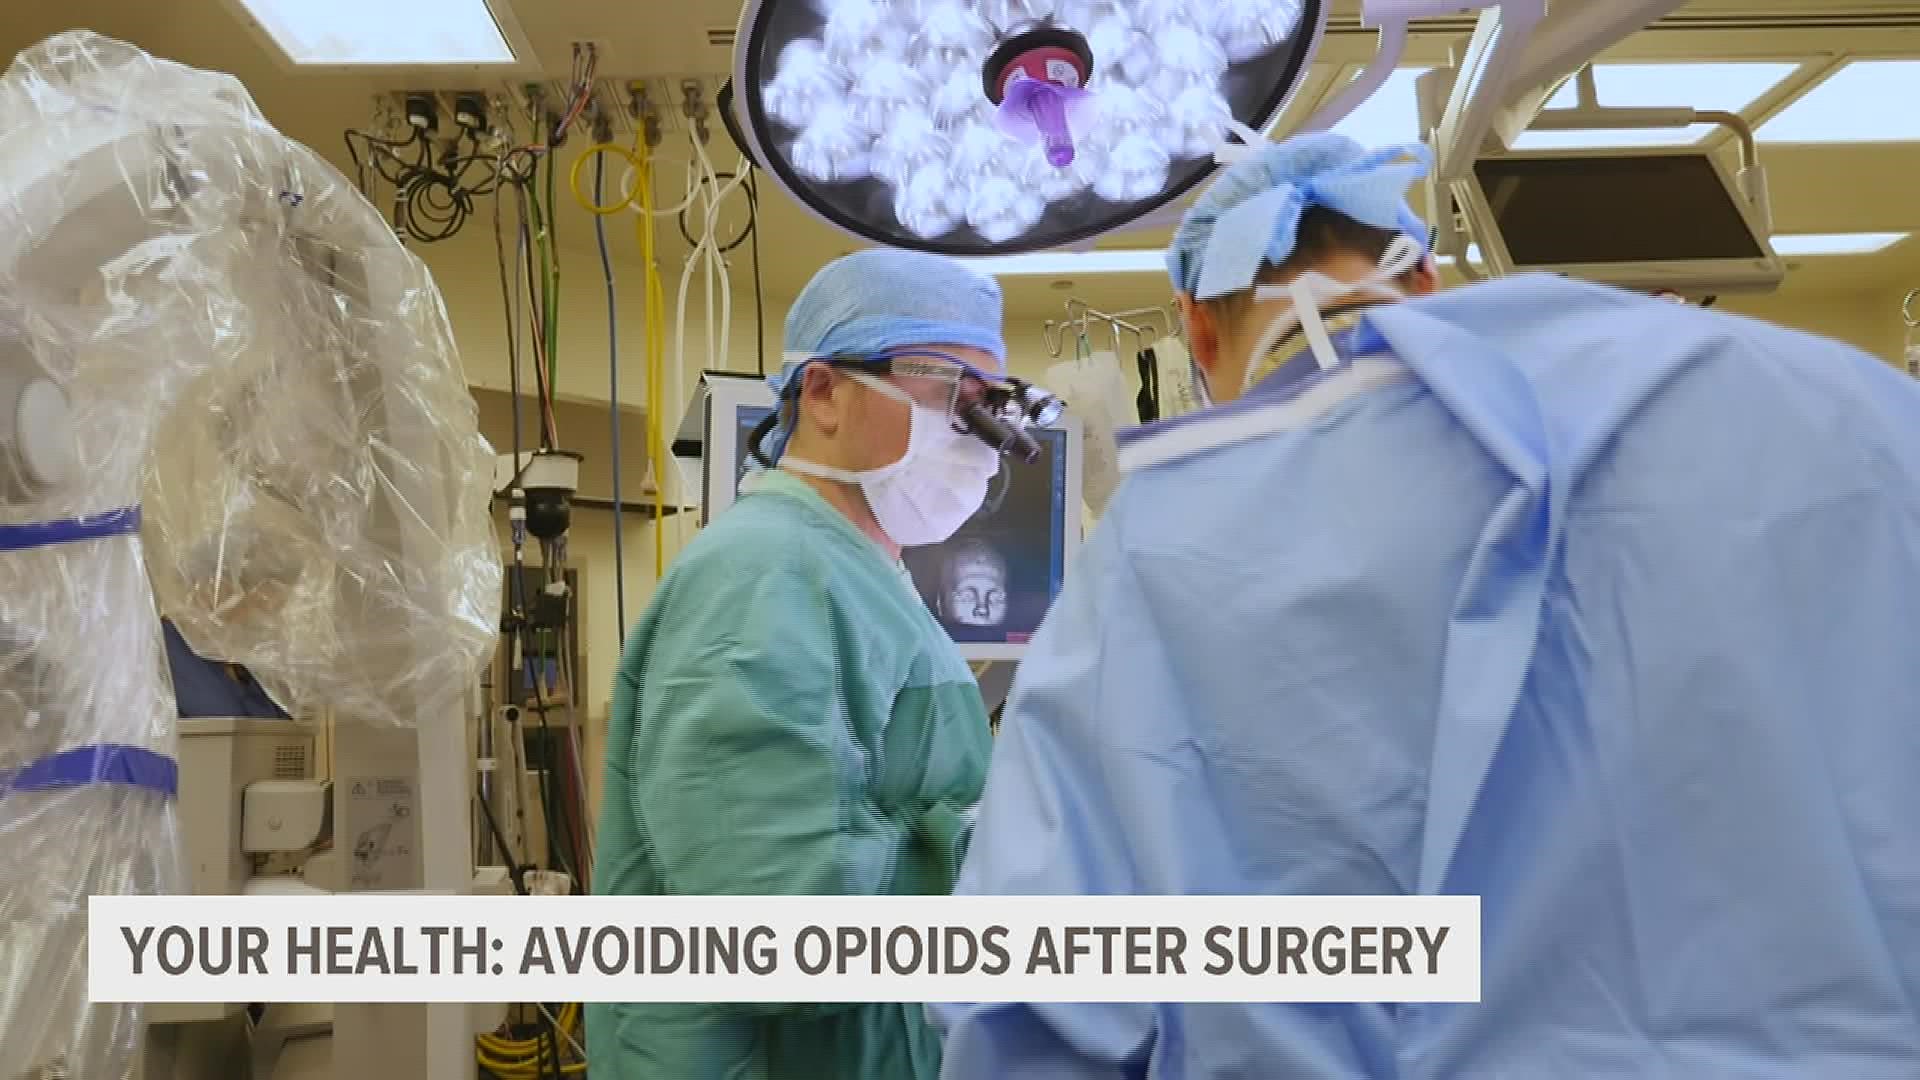 In the wake of an epidemic of opioid addiction and deaths, there’s a growing movement among surgeons to find other ways to successfully manage post-surgery pain.